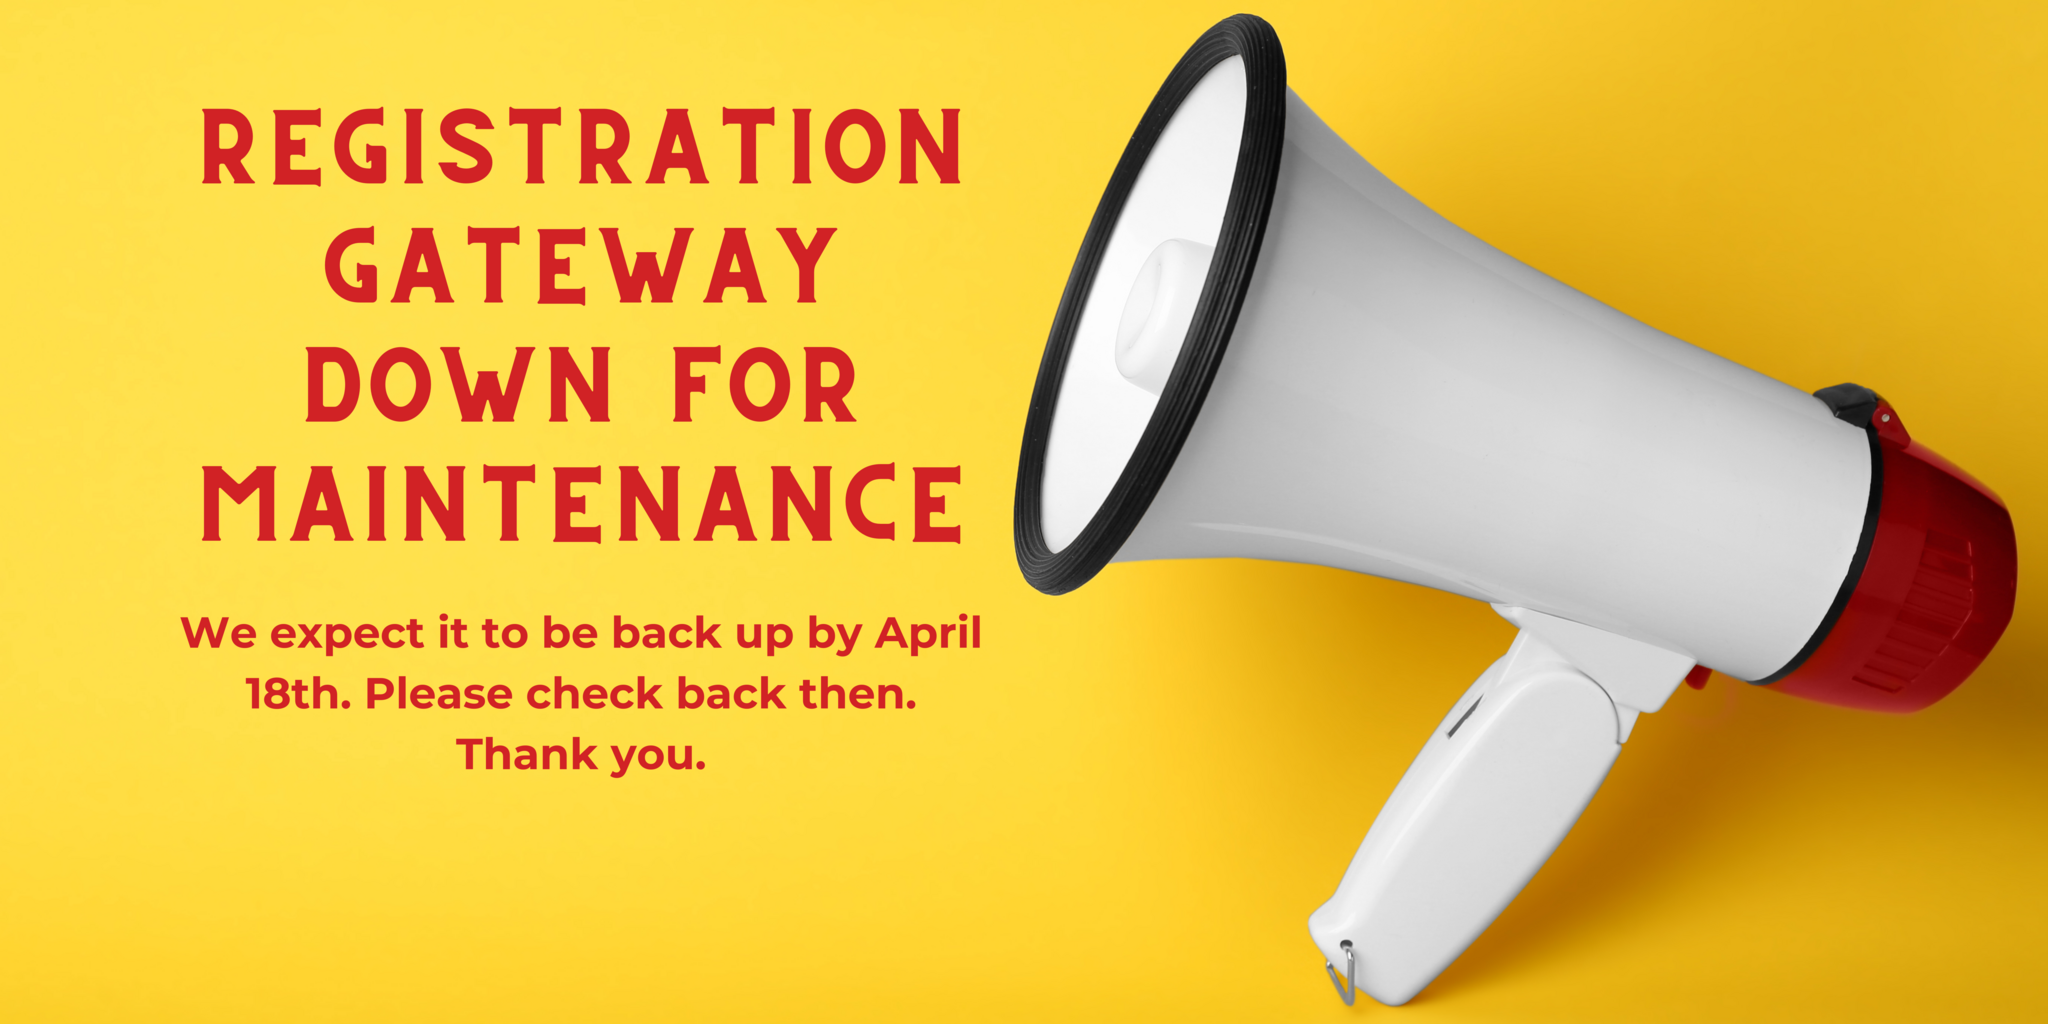 Registration Gateway is down for maintenance. We expect it to be back up by April 18th. Please check back then. Thank you.